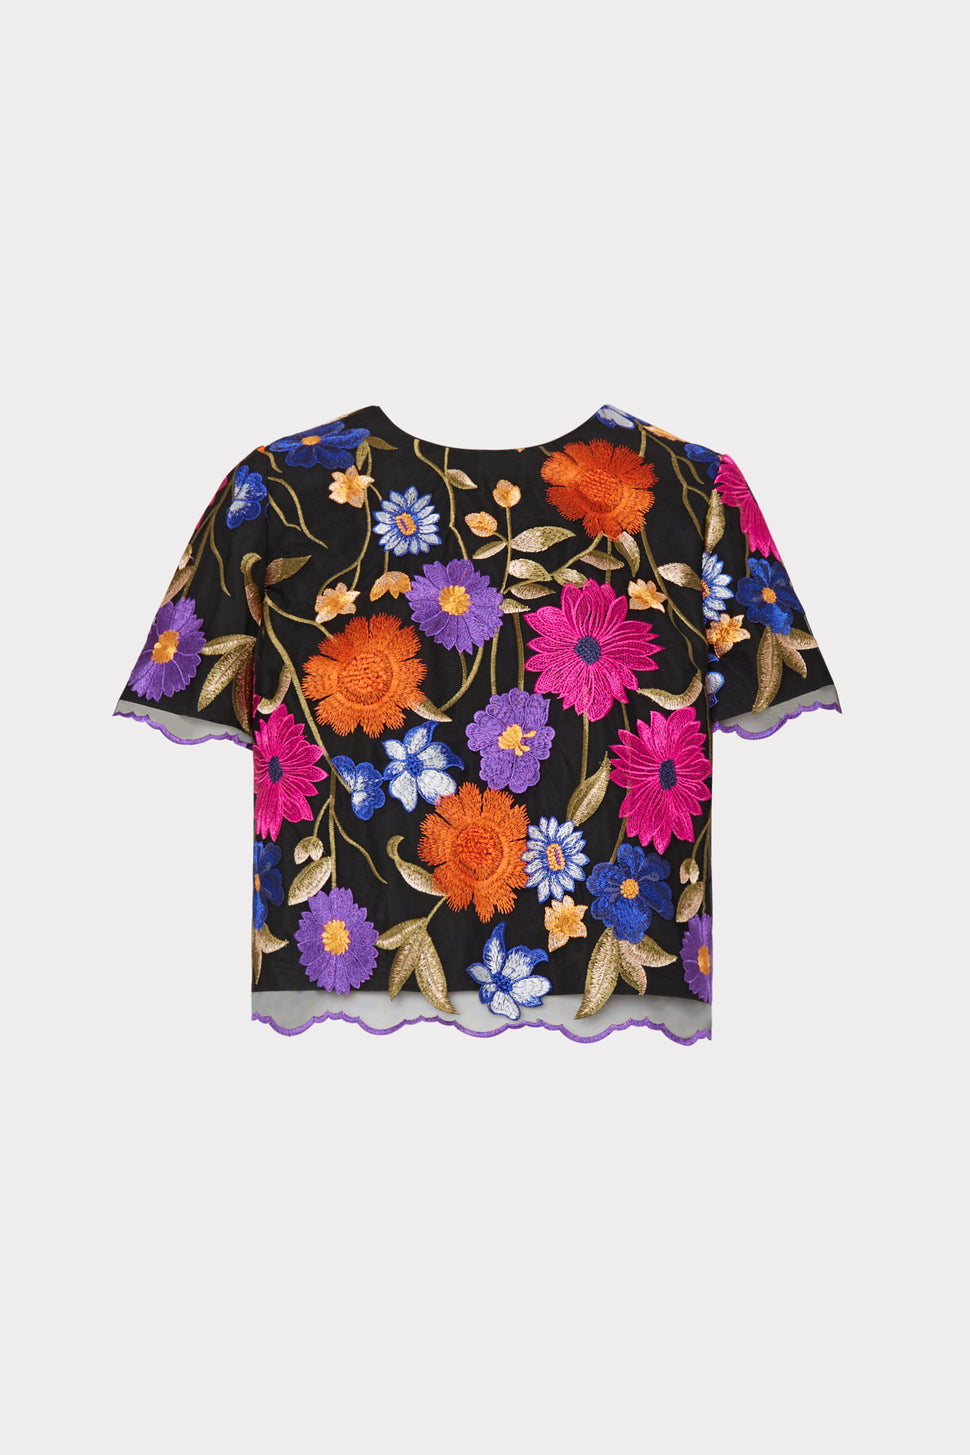 Katelynn Fall Foliage Embroidery Tee in Black Multi - MILLY in